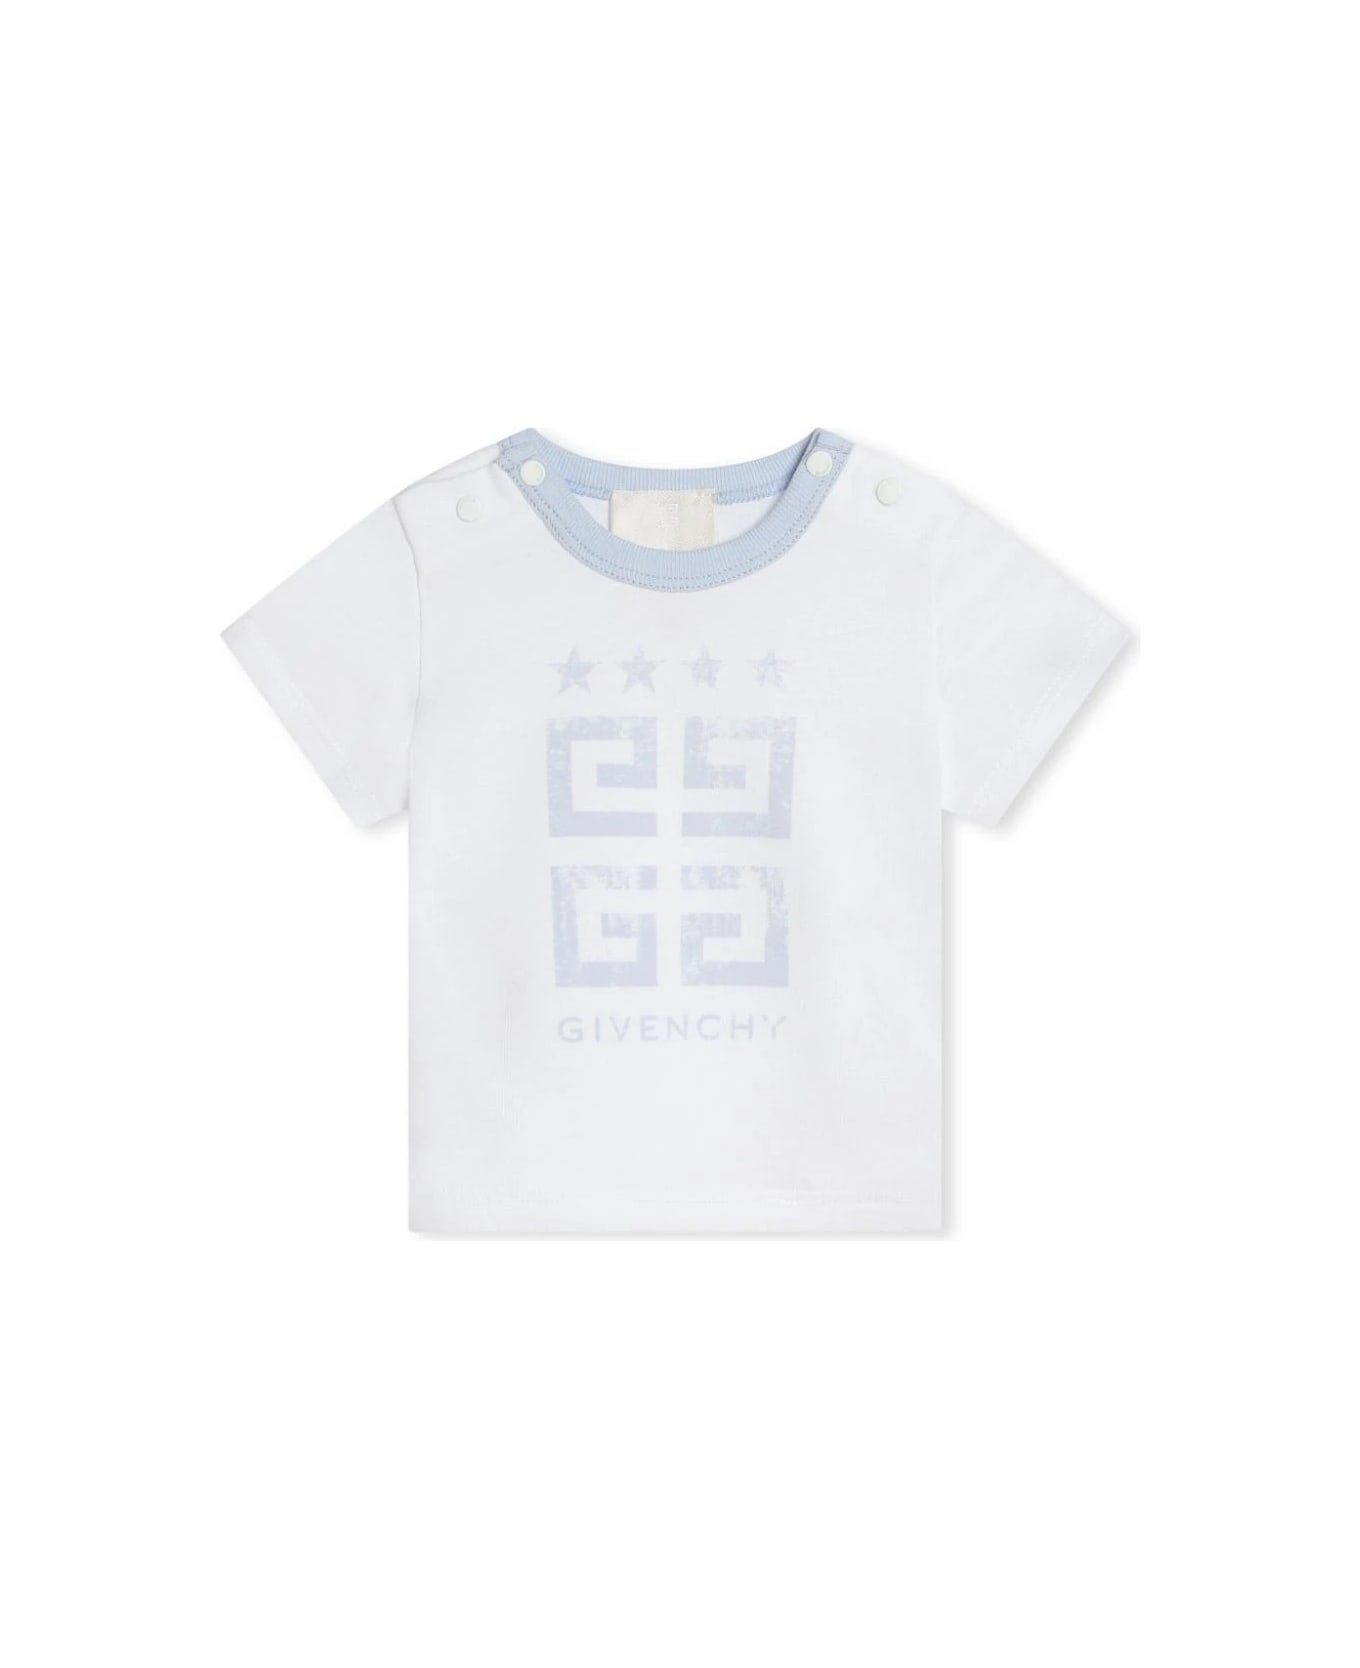 Givenchy Low White And Light Blue Set With T-shirt, Shorts And Bandana - Blue